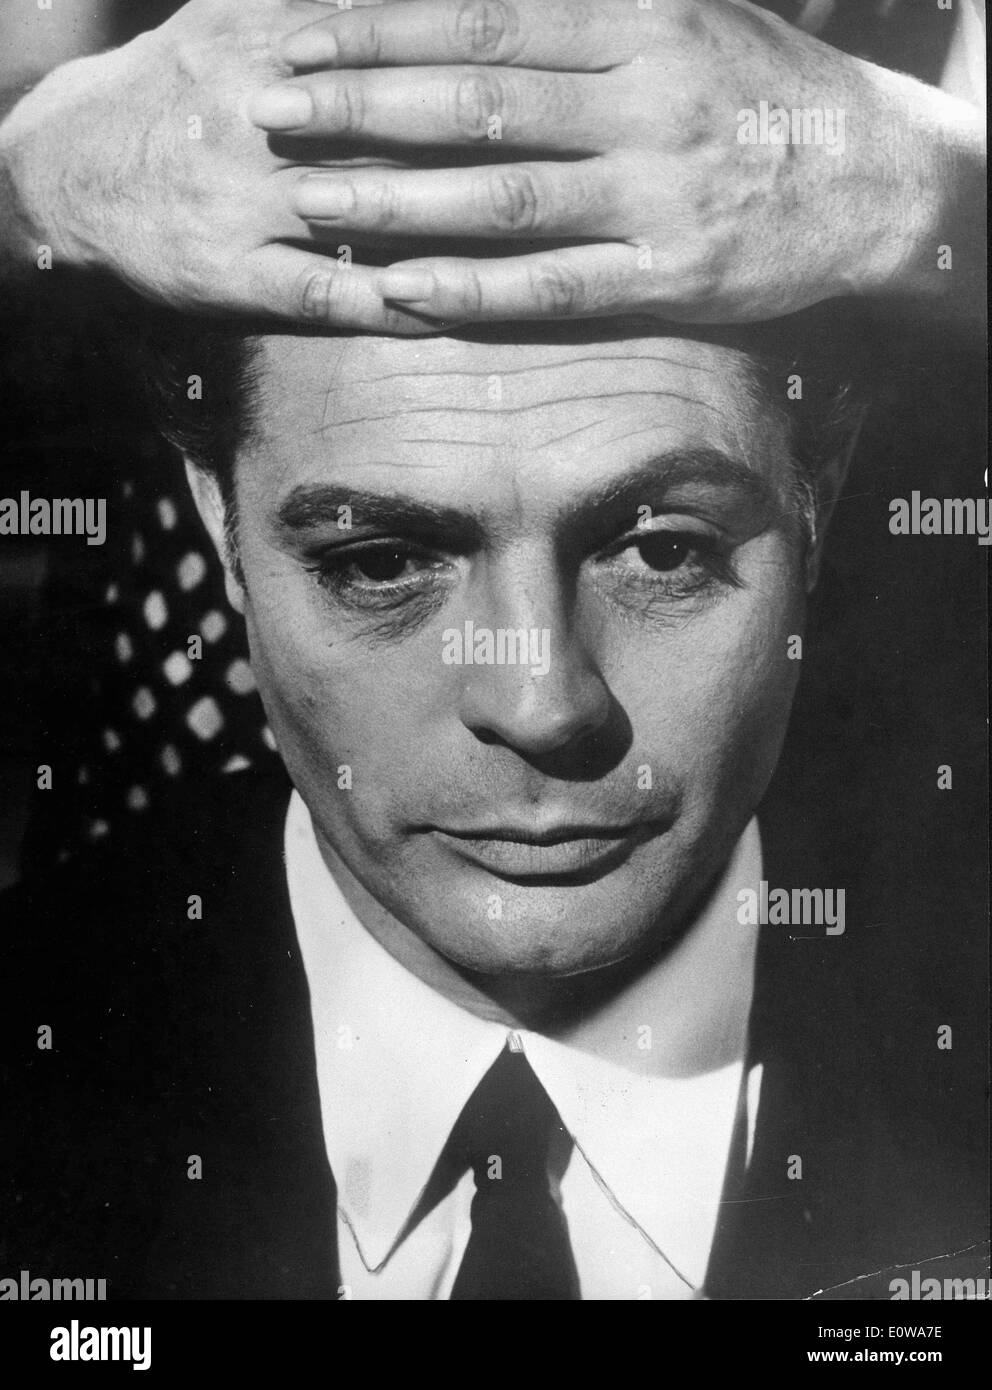 Portrait of Marcello Mastroianni with hands on his forehead Stock Photo